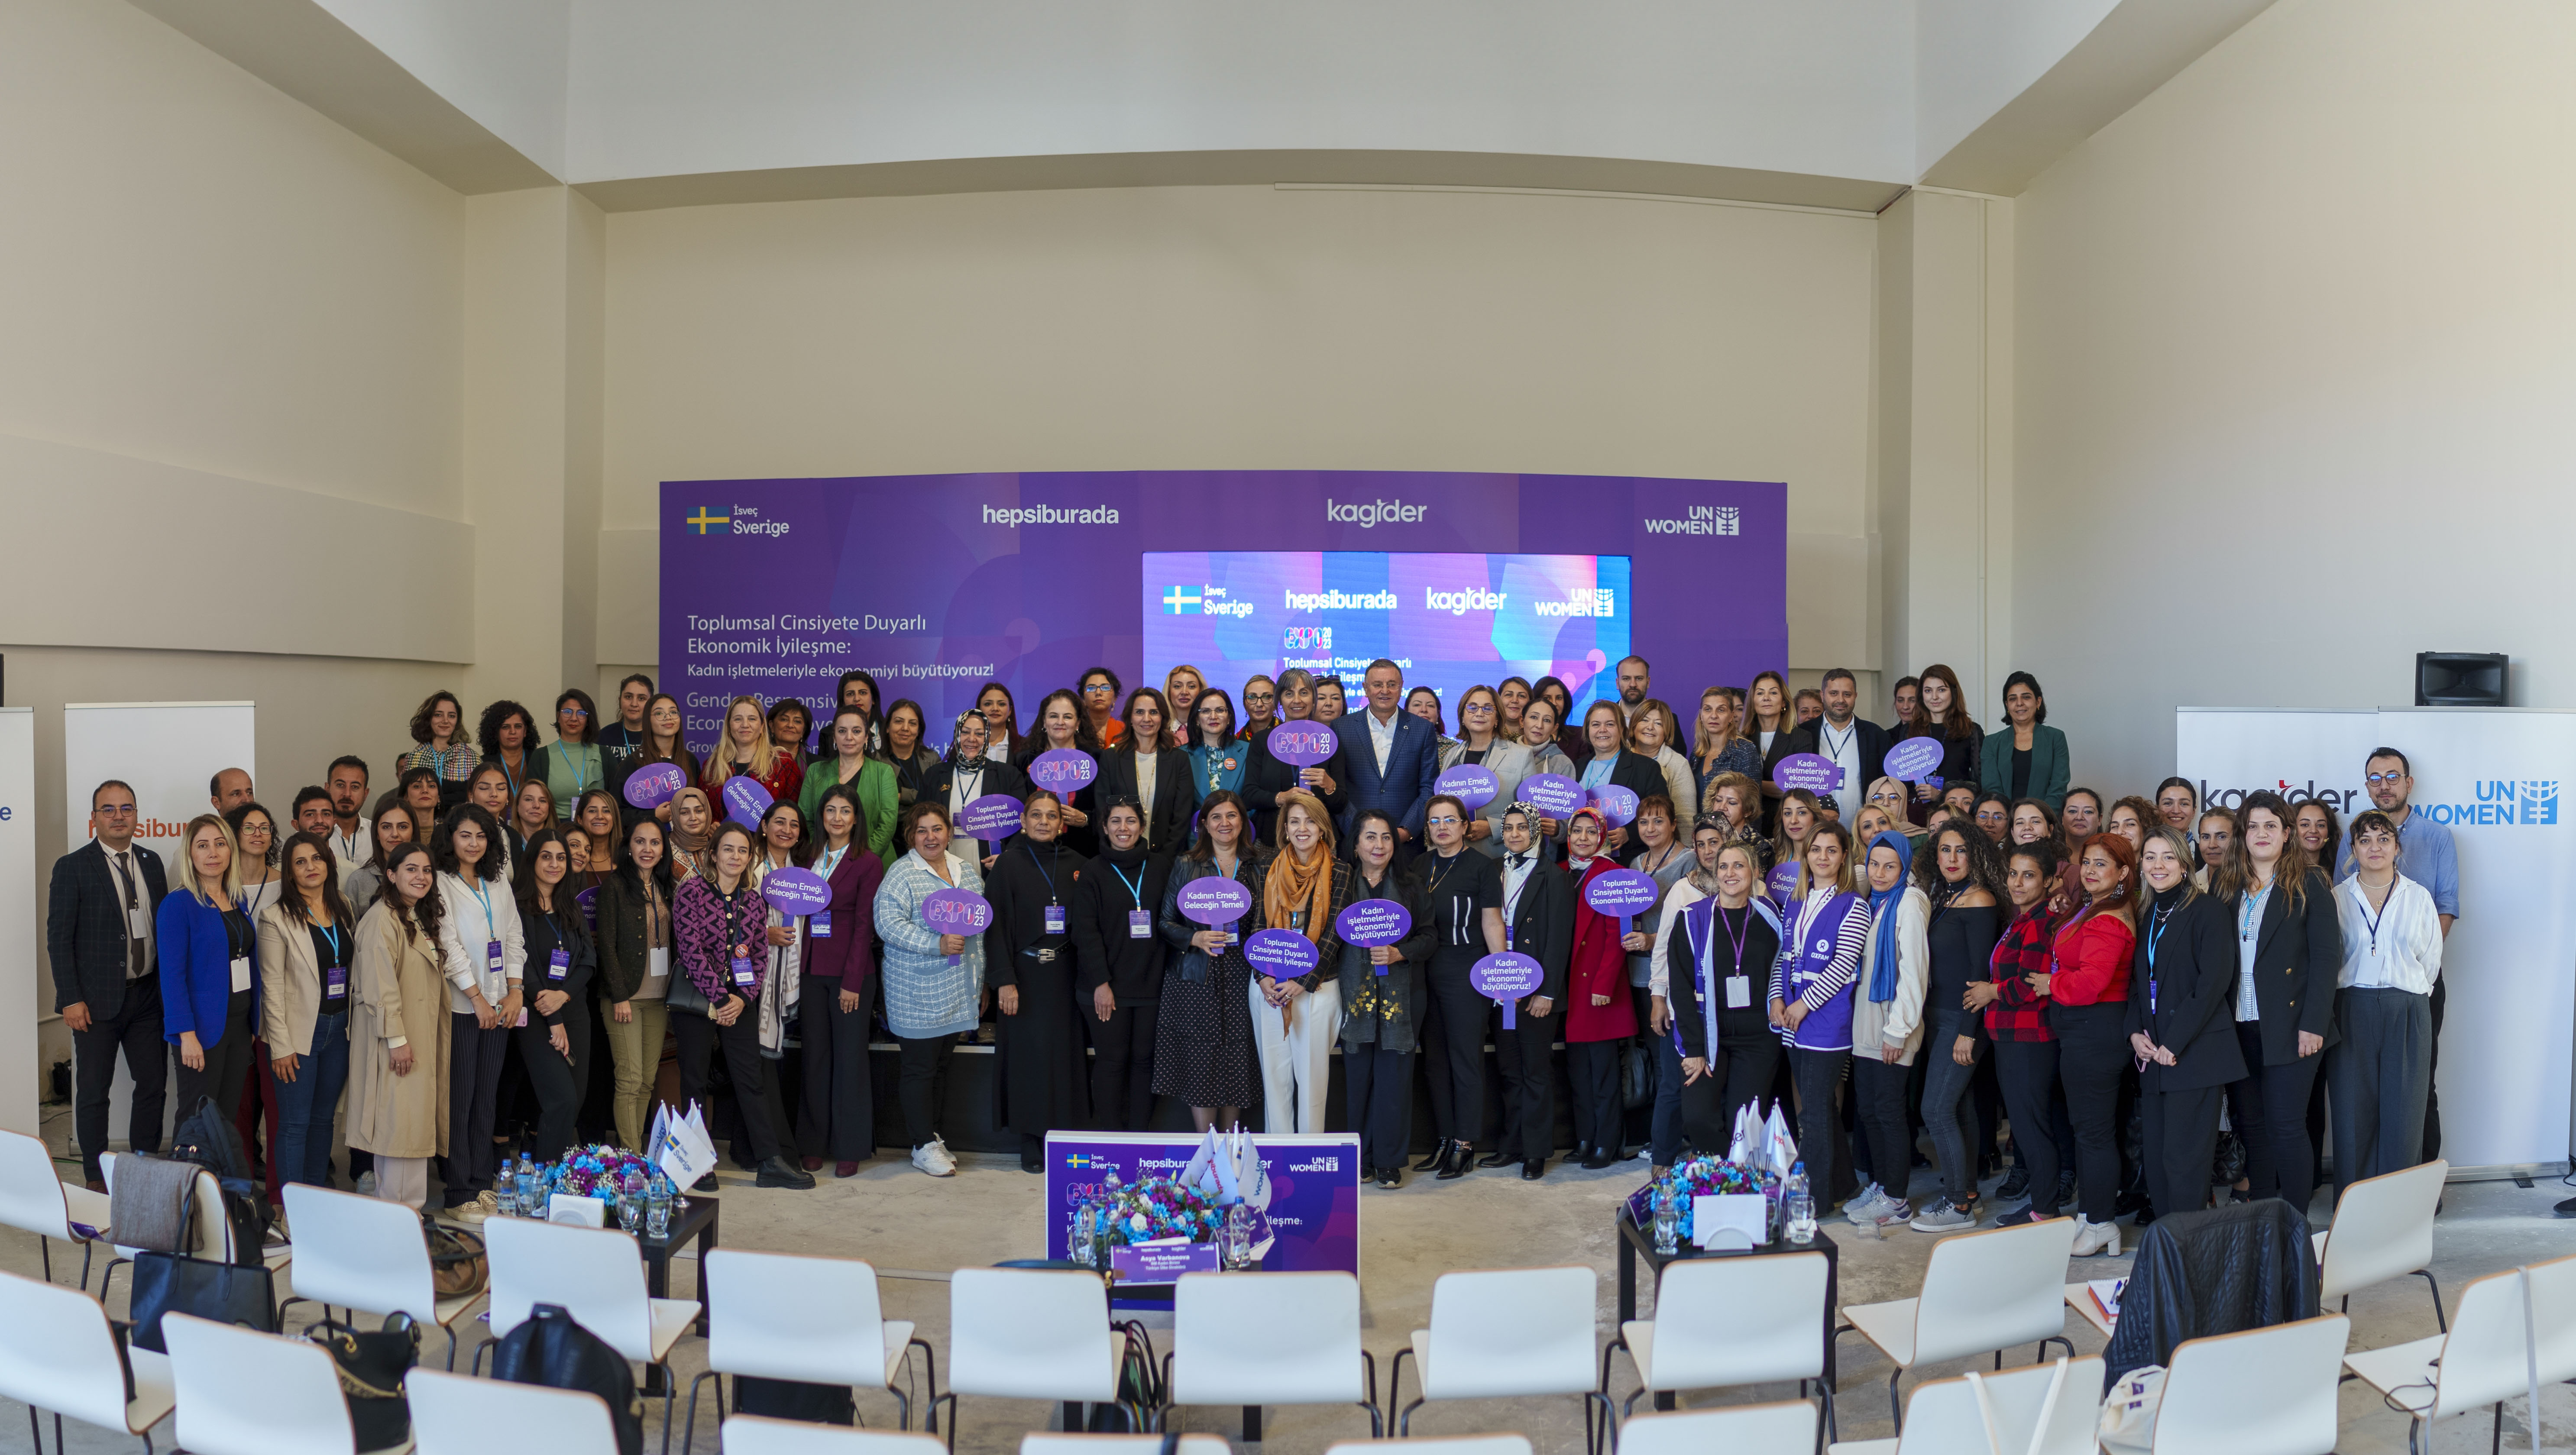 More than 150 women entrepreneurs joined UN Women’s “Gender Responsive Economic Recovery” conference in earthquake-hit Hatay, Türkiye, to promote women’s leadership in economic recovery.  Photo: UN Women